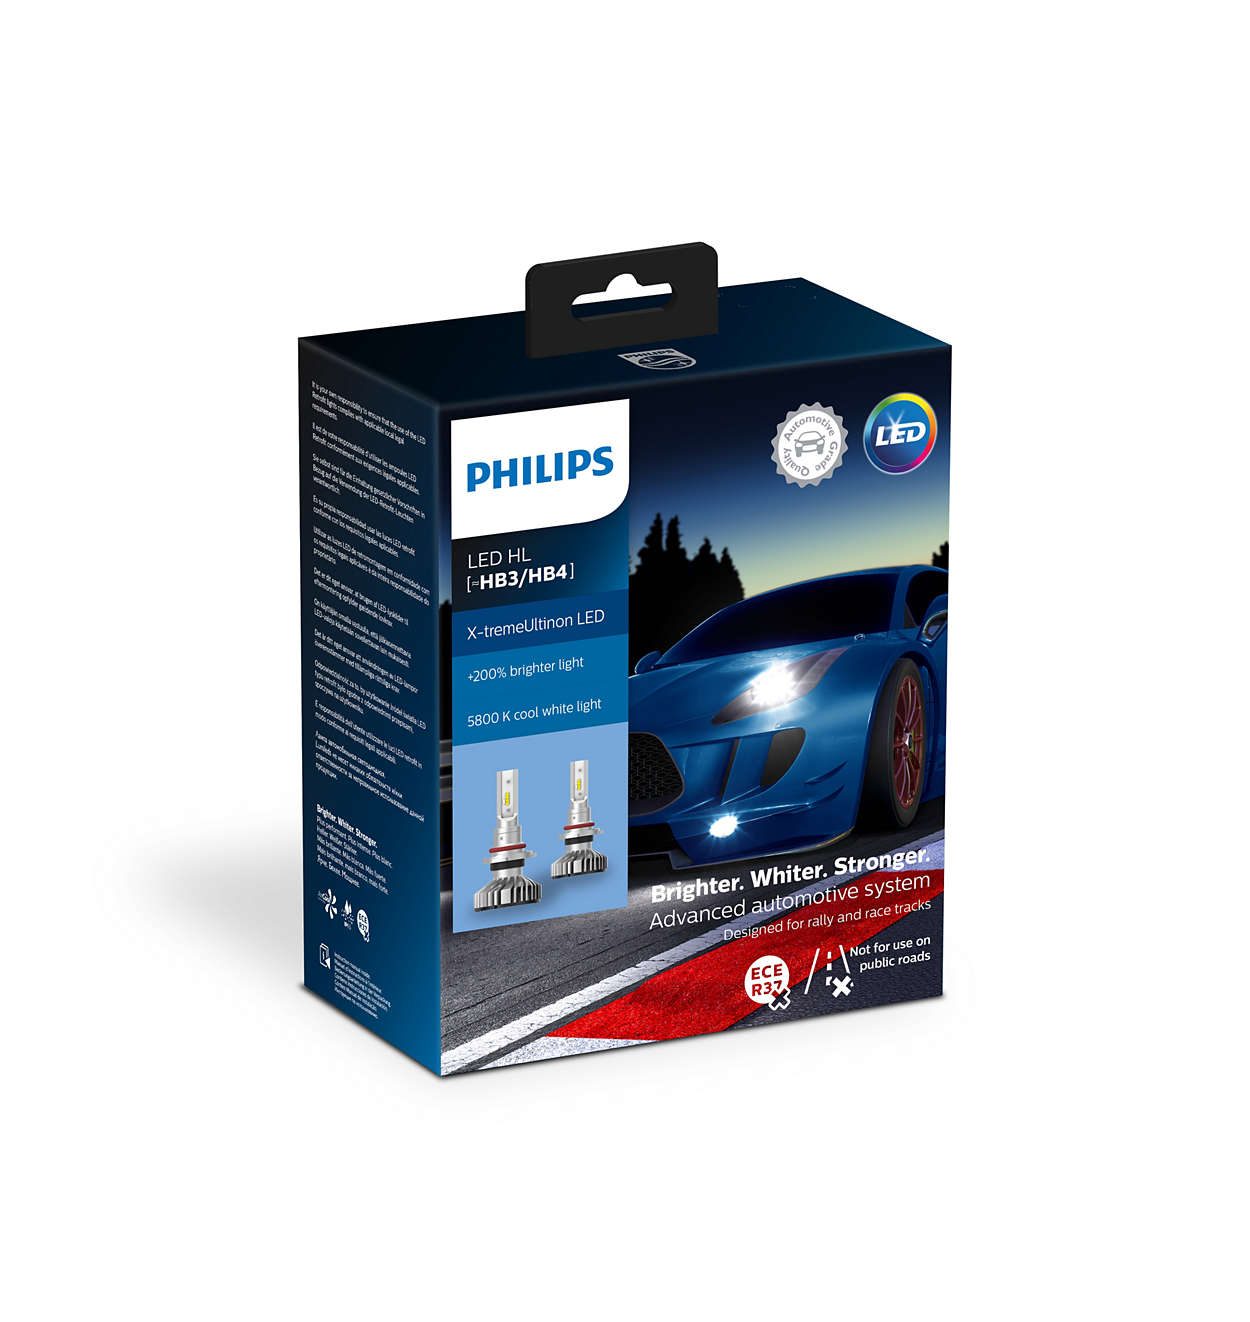 PHILIPS LED, and with free Worldwide shipping!